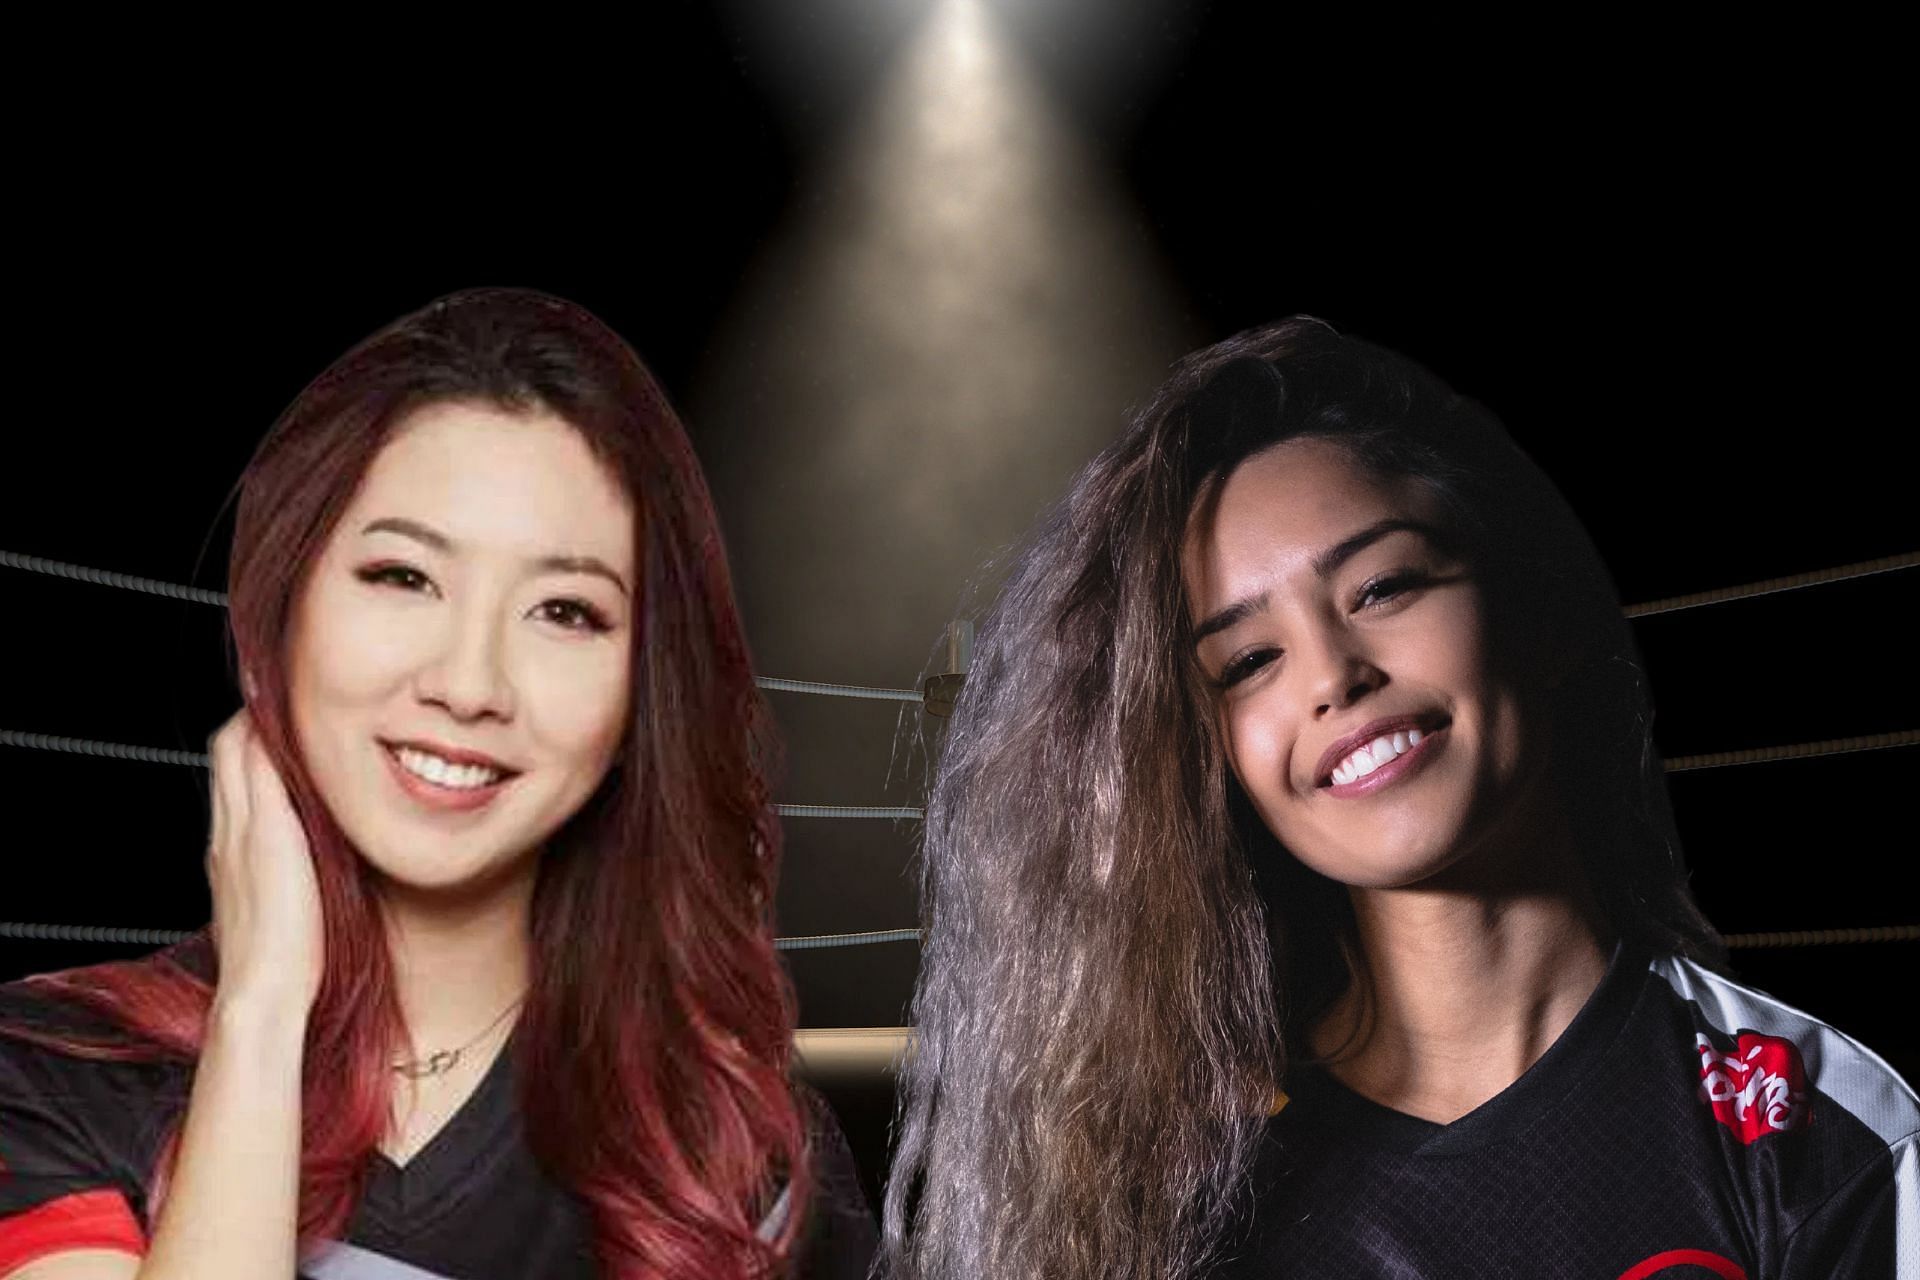 Valkyrae has been learning how to box, and Fuslie gushed over how buff her friend is (Image via Sportskeeda)